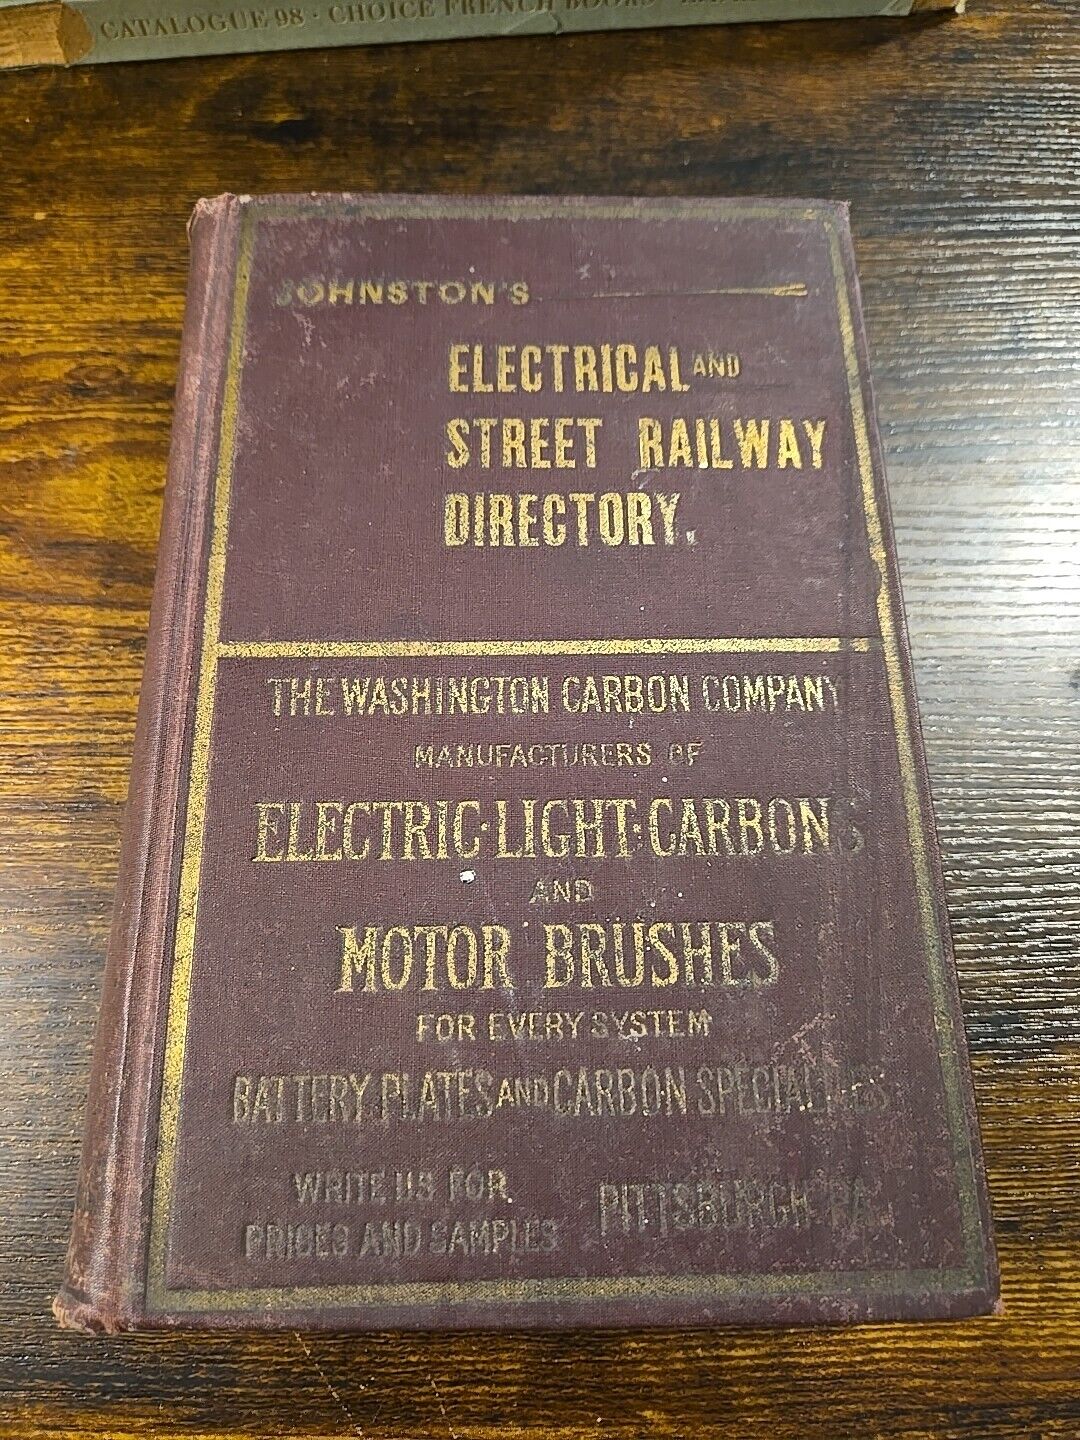 1894 Vintage Book: Johnston's Electrical And Street Car Railway Directory